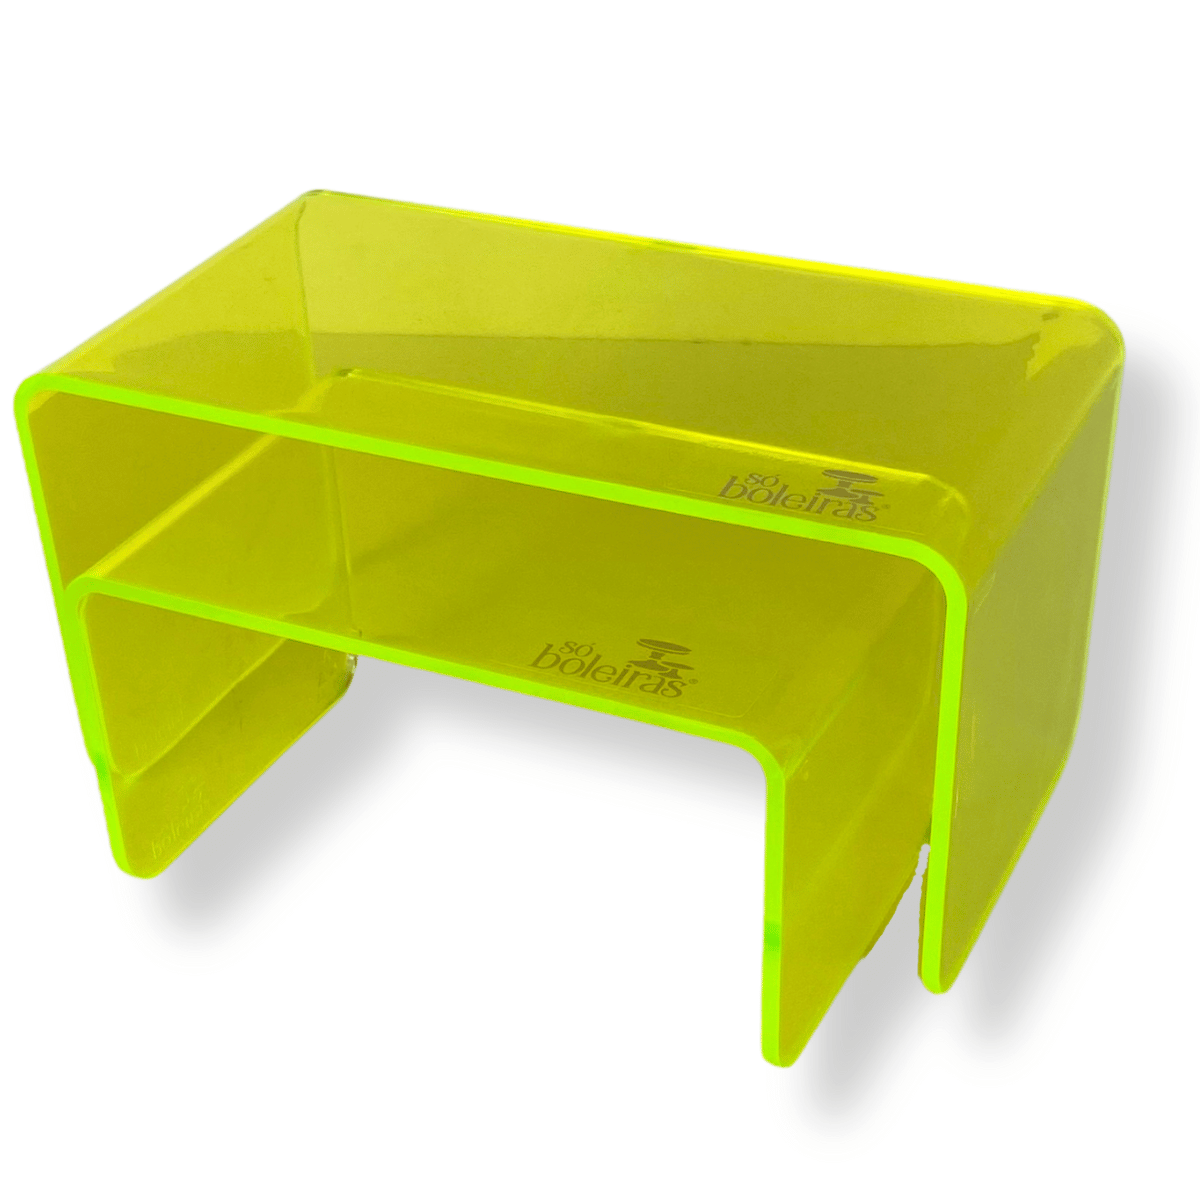 Neon Yellow Clean Colorful pair of stands